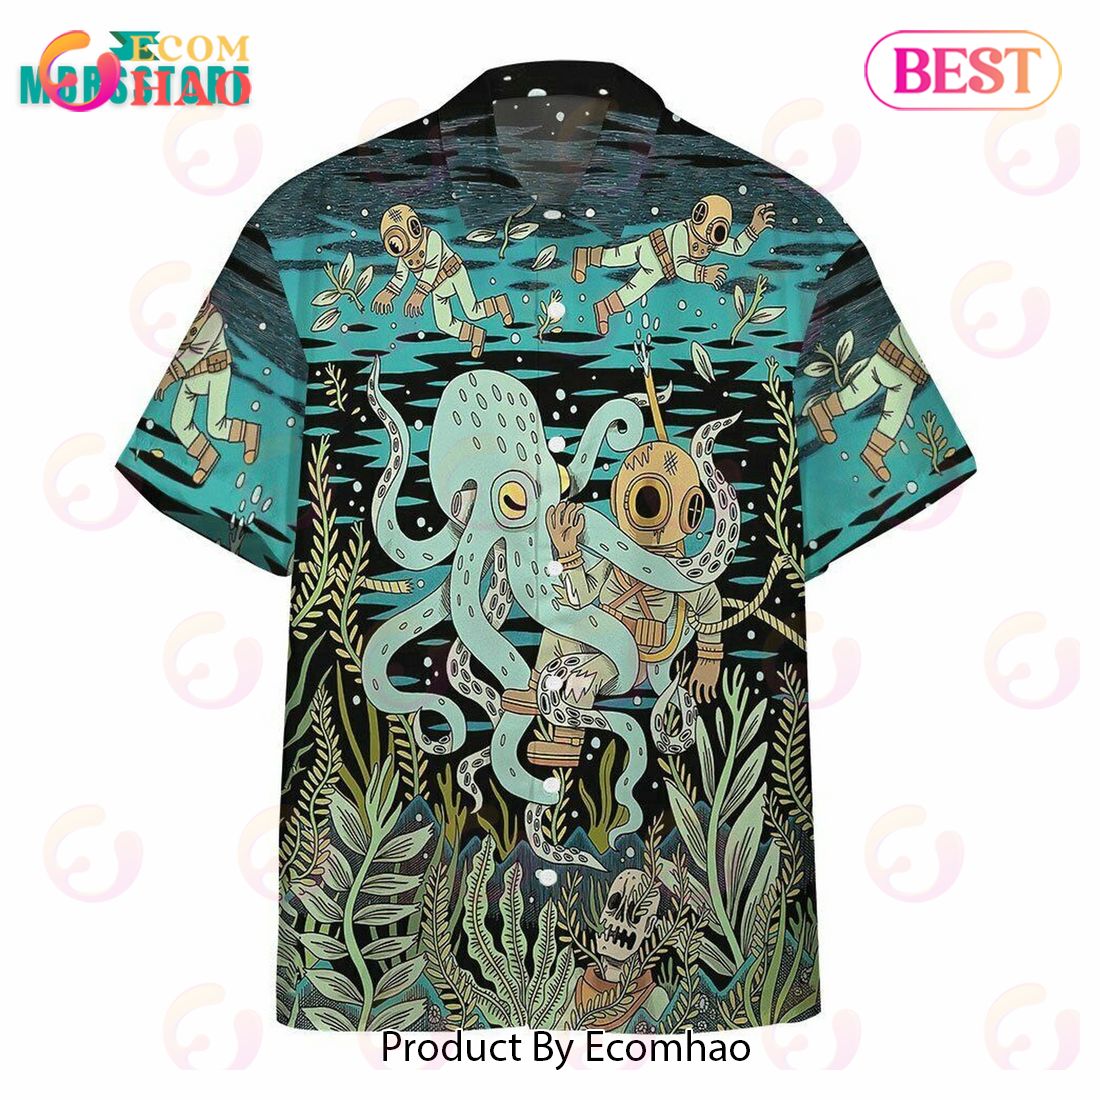 Diver Fighting With Octopus Button Down Short Sleeve Series Vintage Beach Hawaiian Shirt